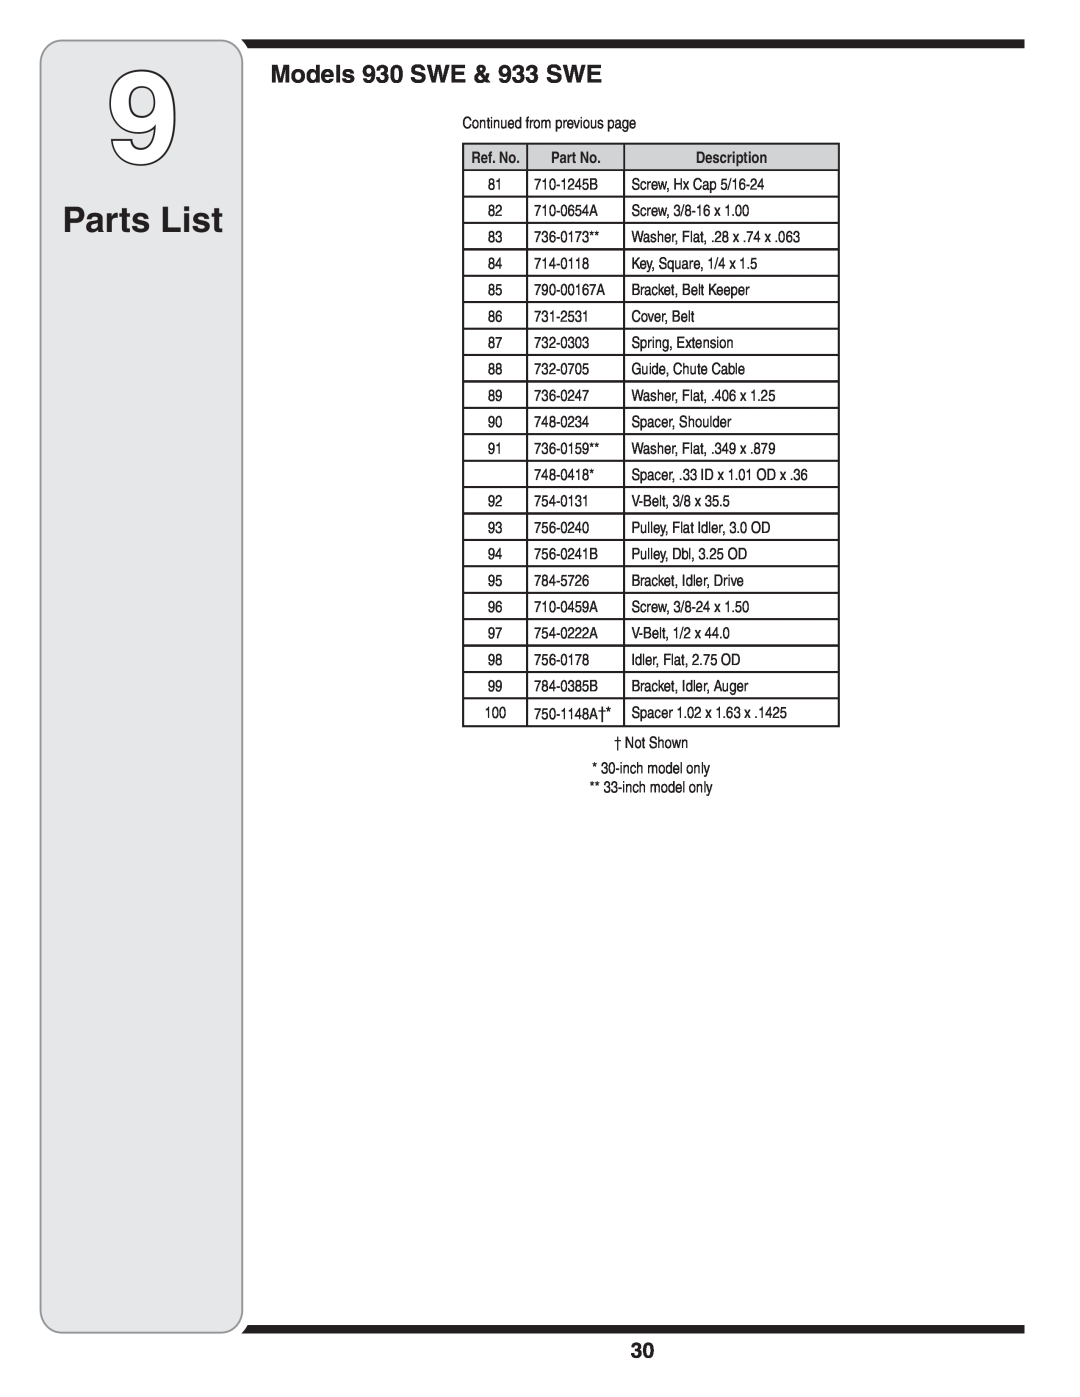 Cub Cadet warranty Parts List, Models 930 SWE & 933 SWE, Continued from previous page, Ref. No 